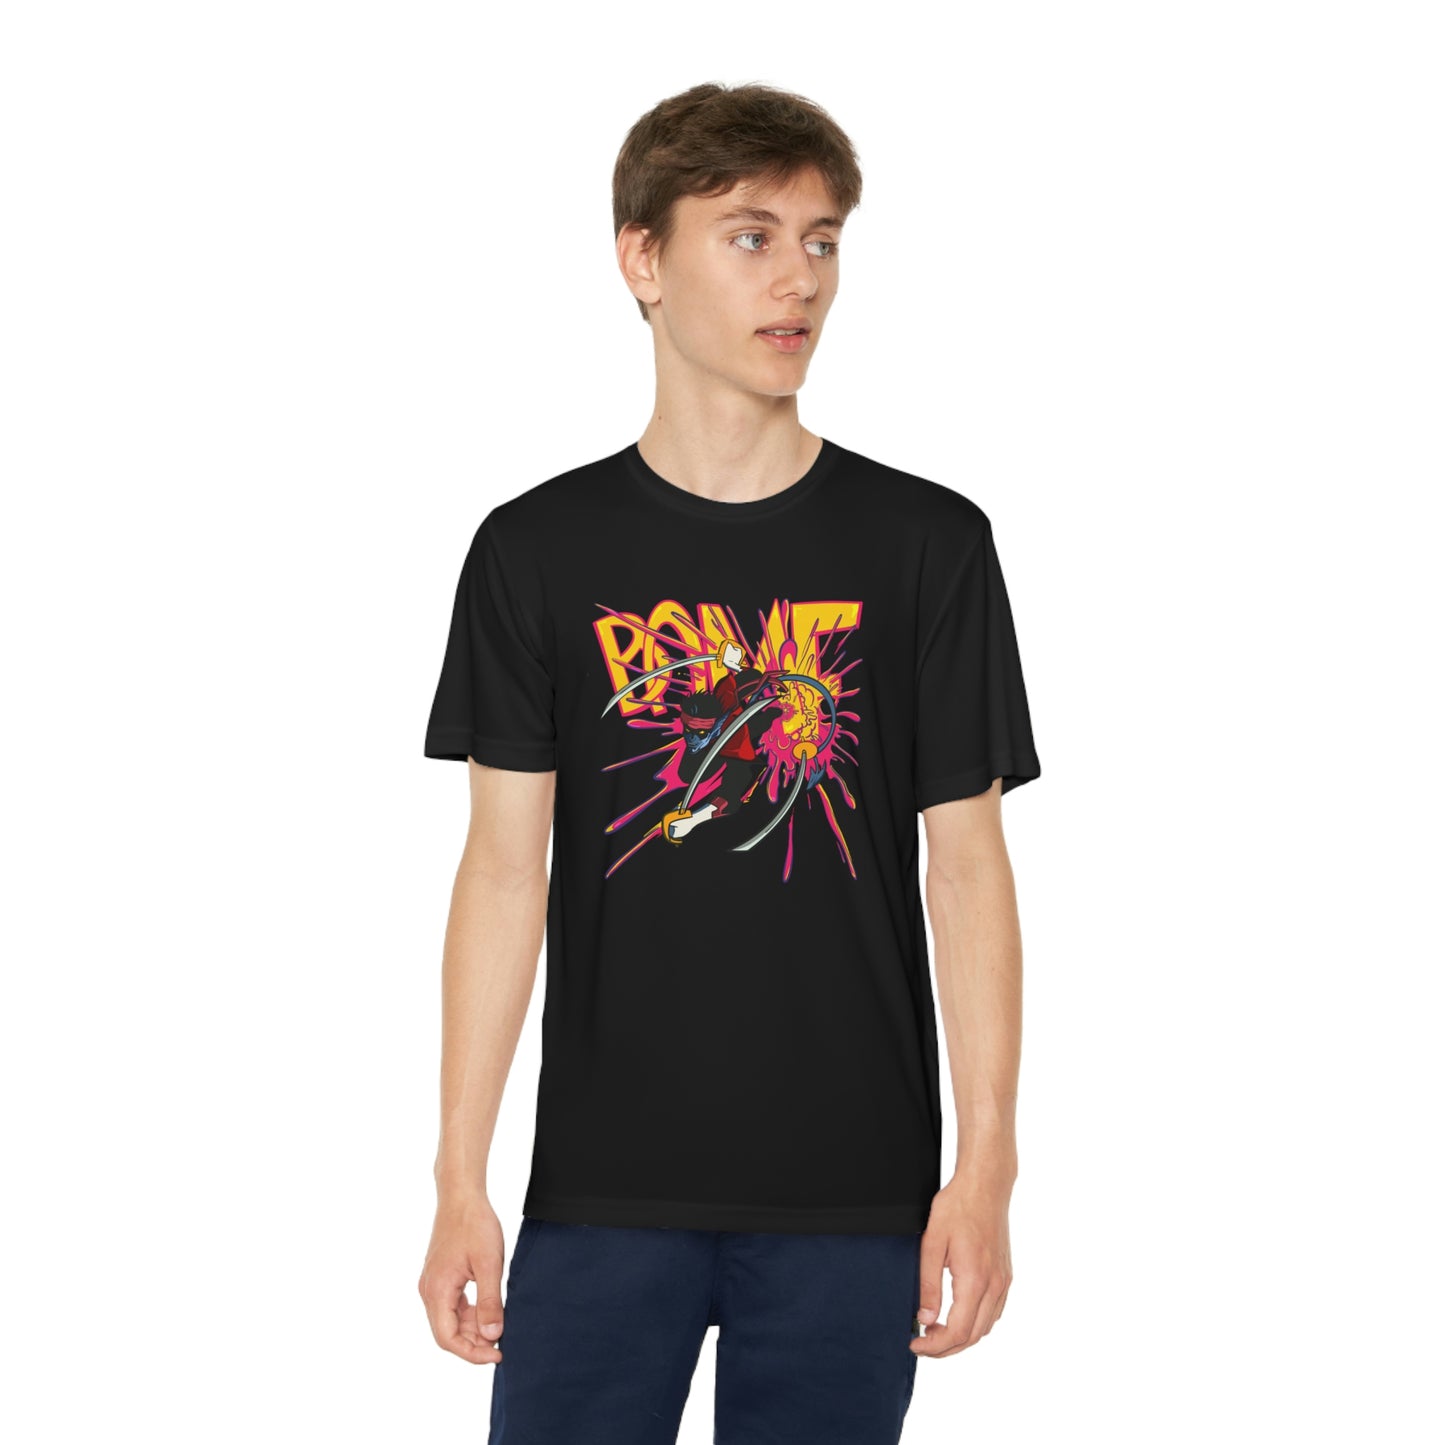 BAMF Youth Competitor Tee